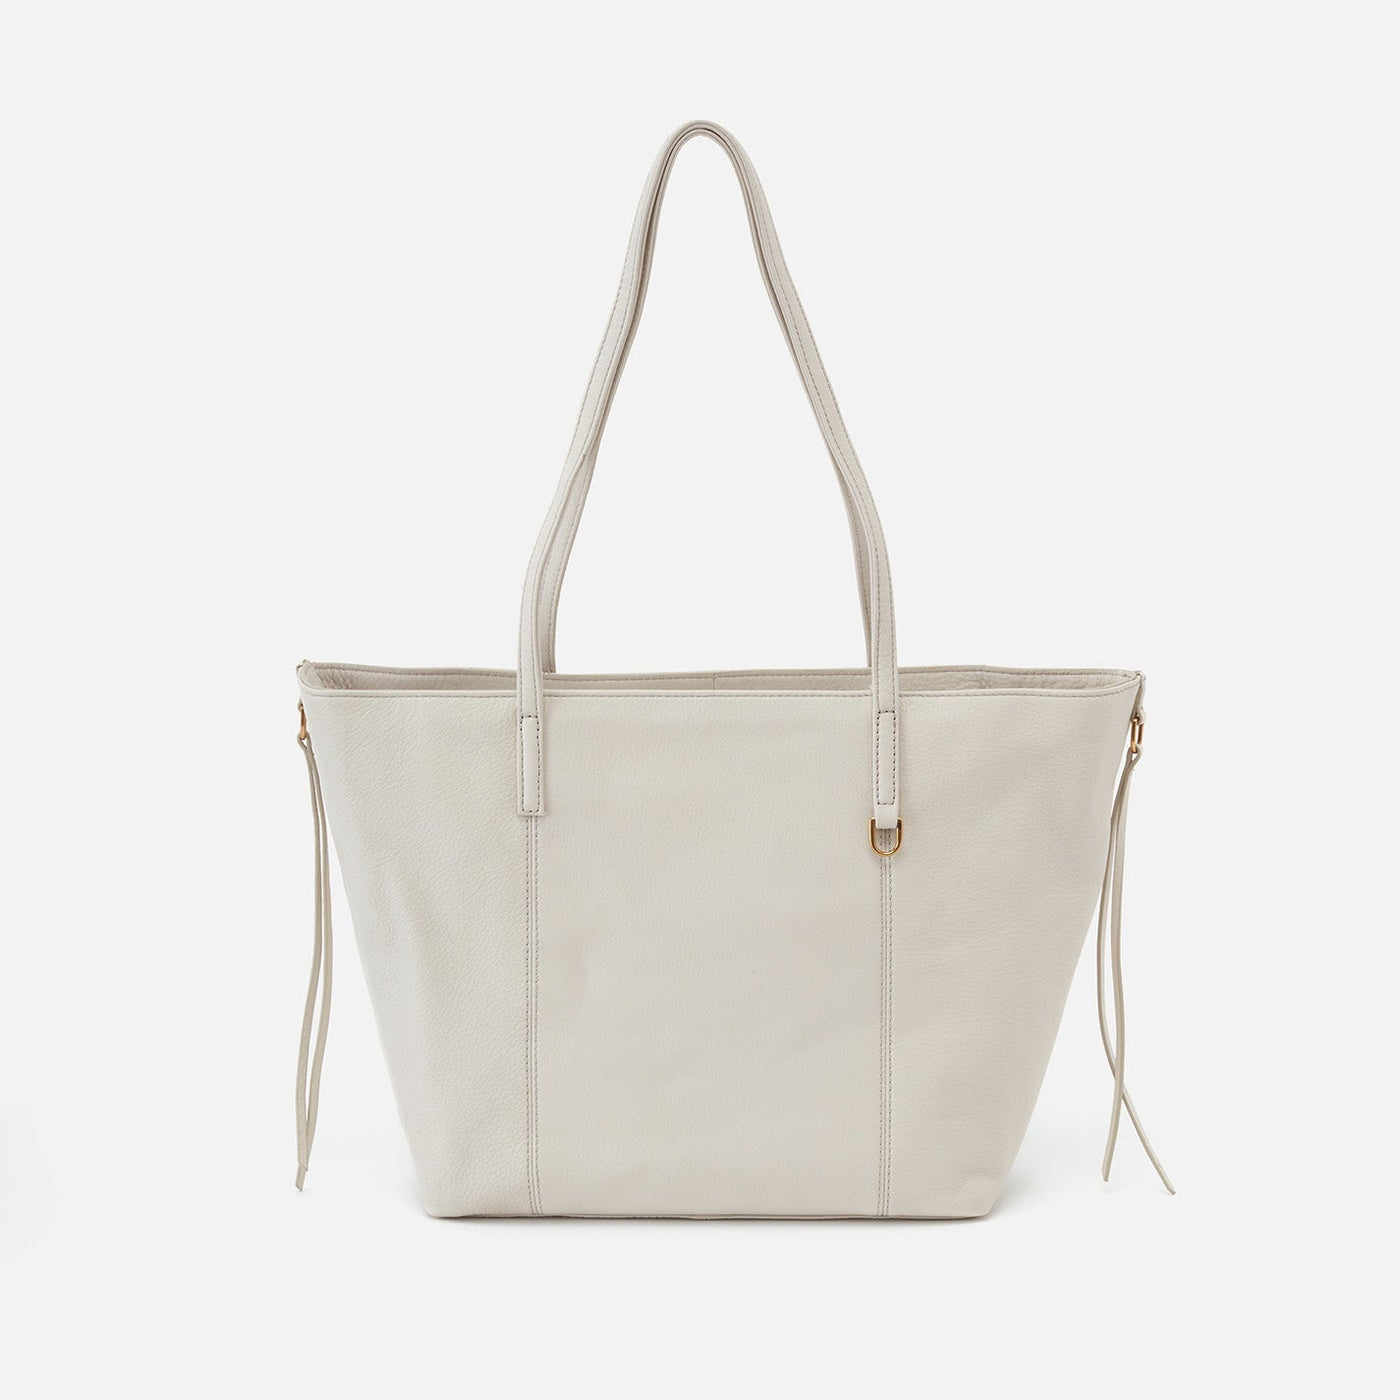 Kingston Small Tote in Pebbled Leather - Powder White